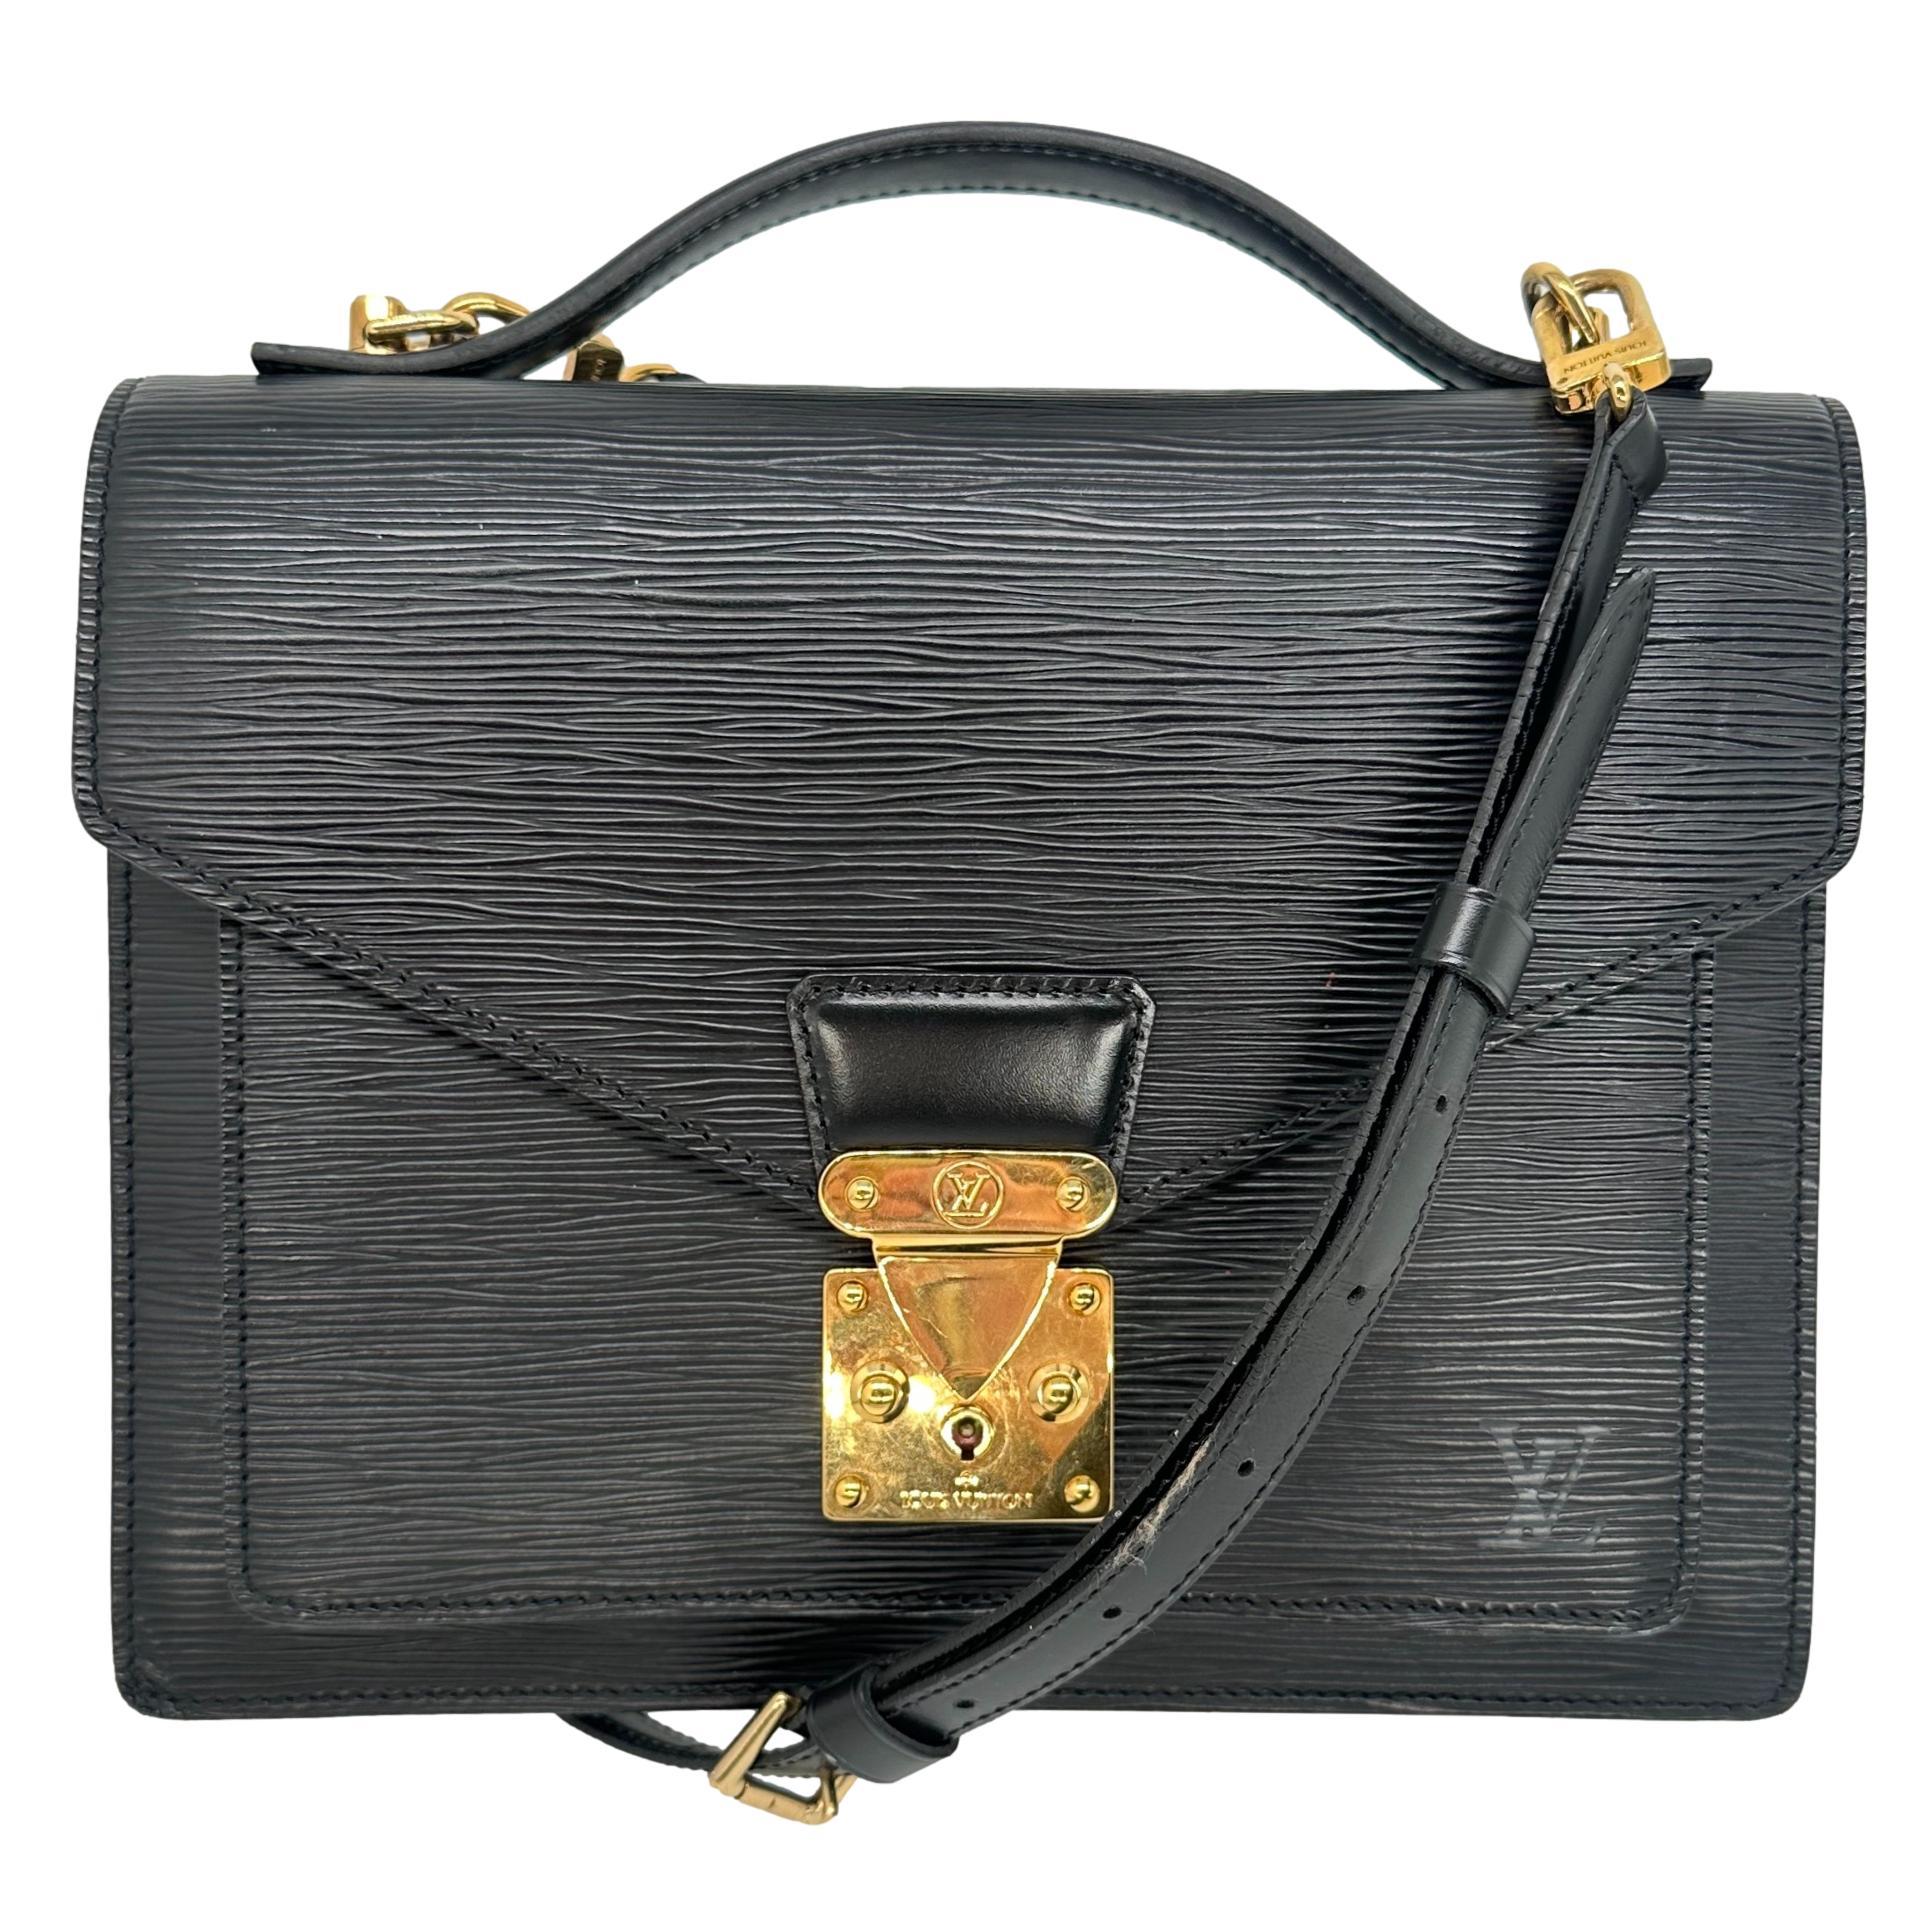 Louis Vuitton Monceau 28 Black Epi Leather Shoulder Crossbody Bag, France 1992. This iconic monceau was first introduced in the early 1990s in the durable leather epi leather and was designed as a purse alternative to a briefcase. The bag was